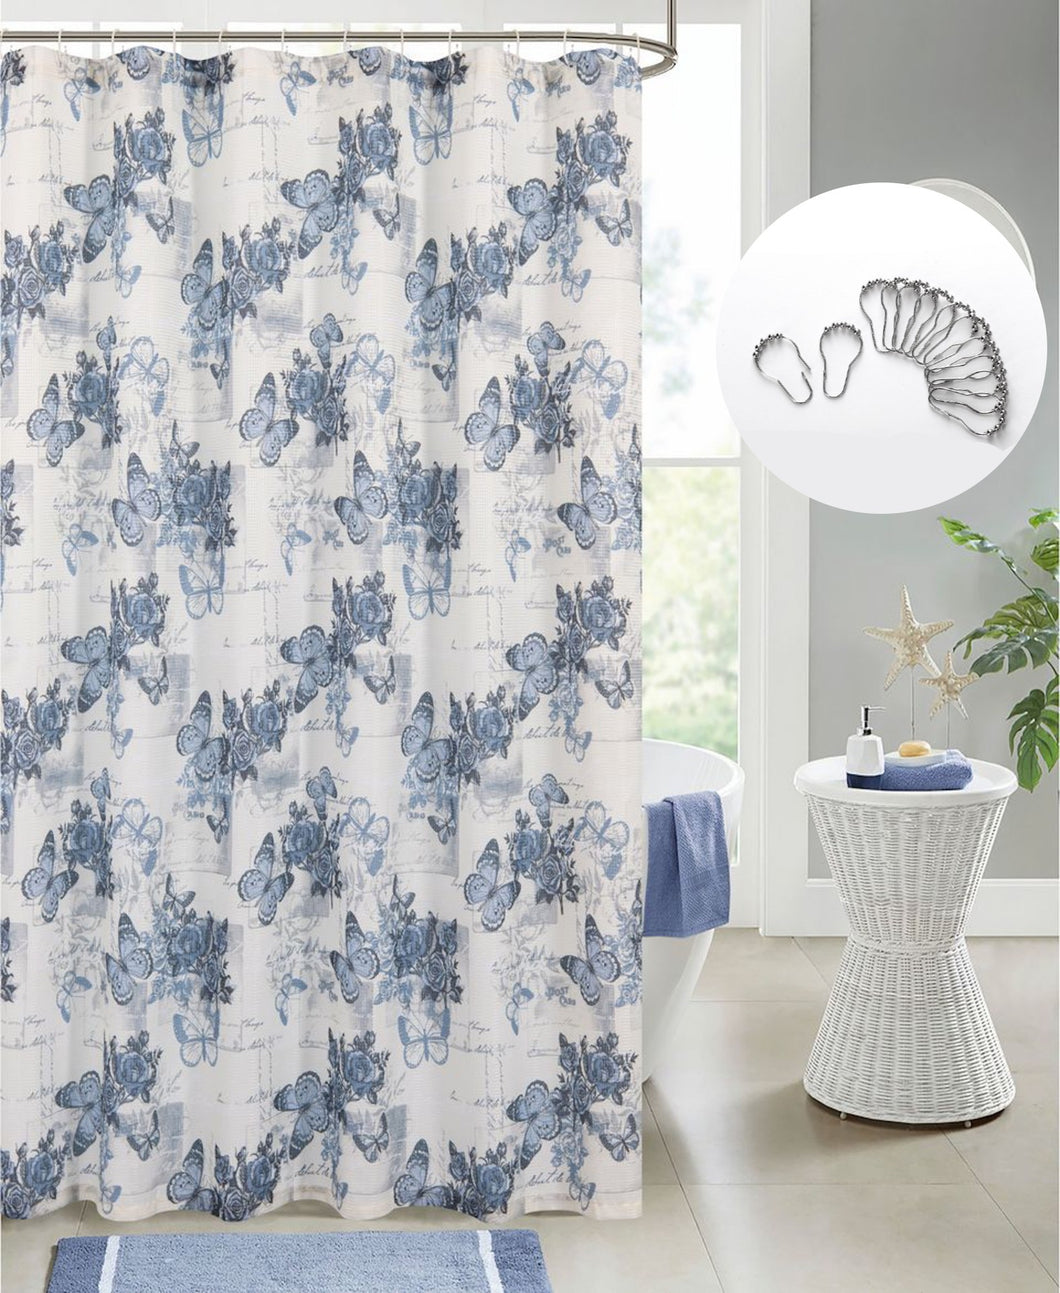 Dainty Home 13 Piece Butterflies Printed Waffle Weave Textured Shower Curtain And 12 Metal Rollerball Hooks